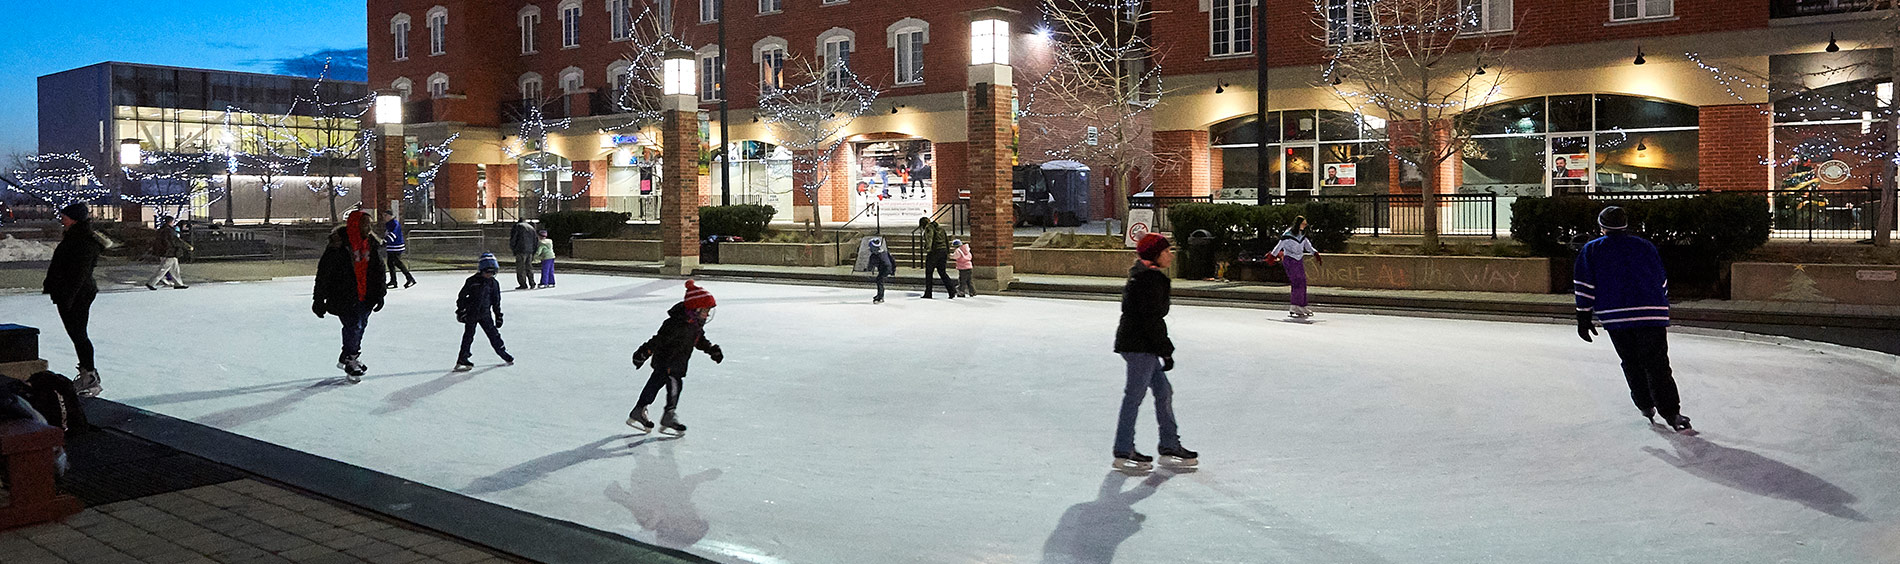 Ice skaters at Harmony Square